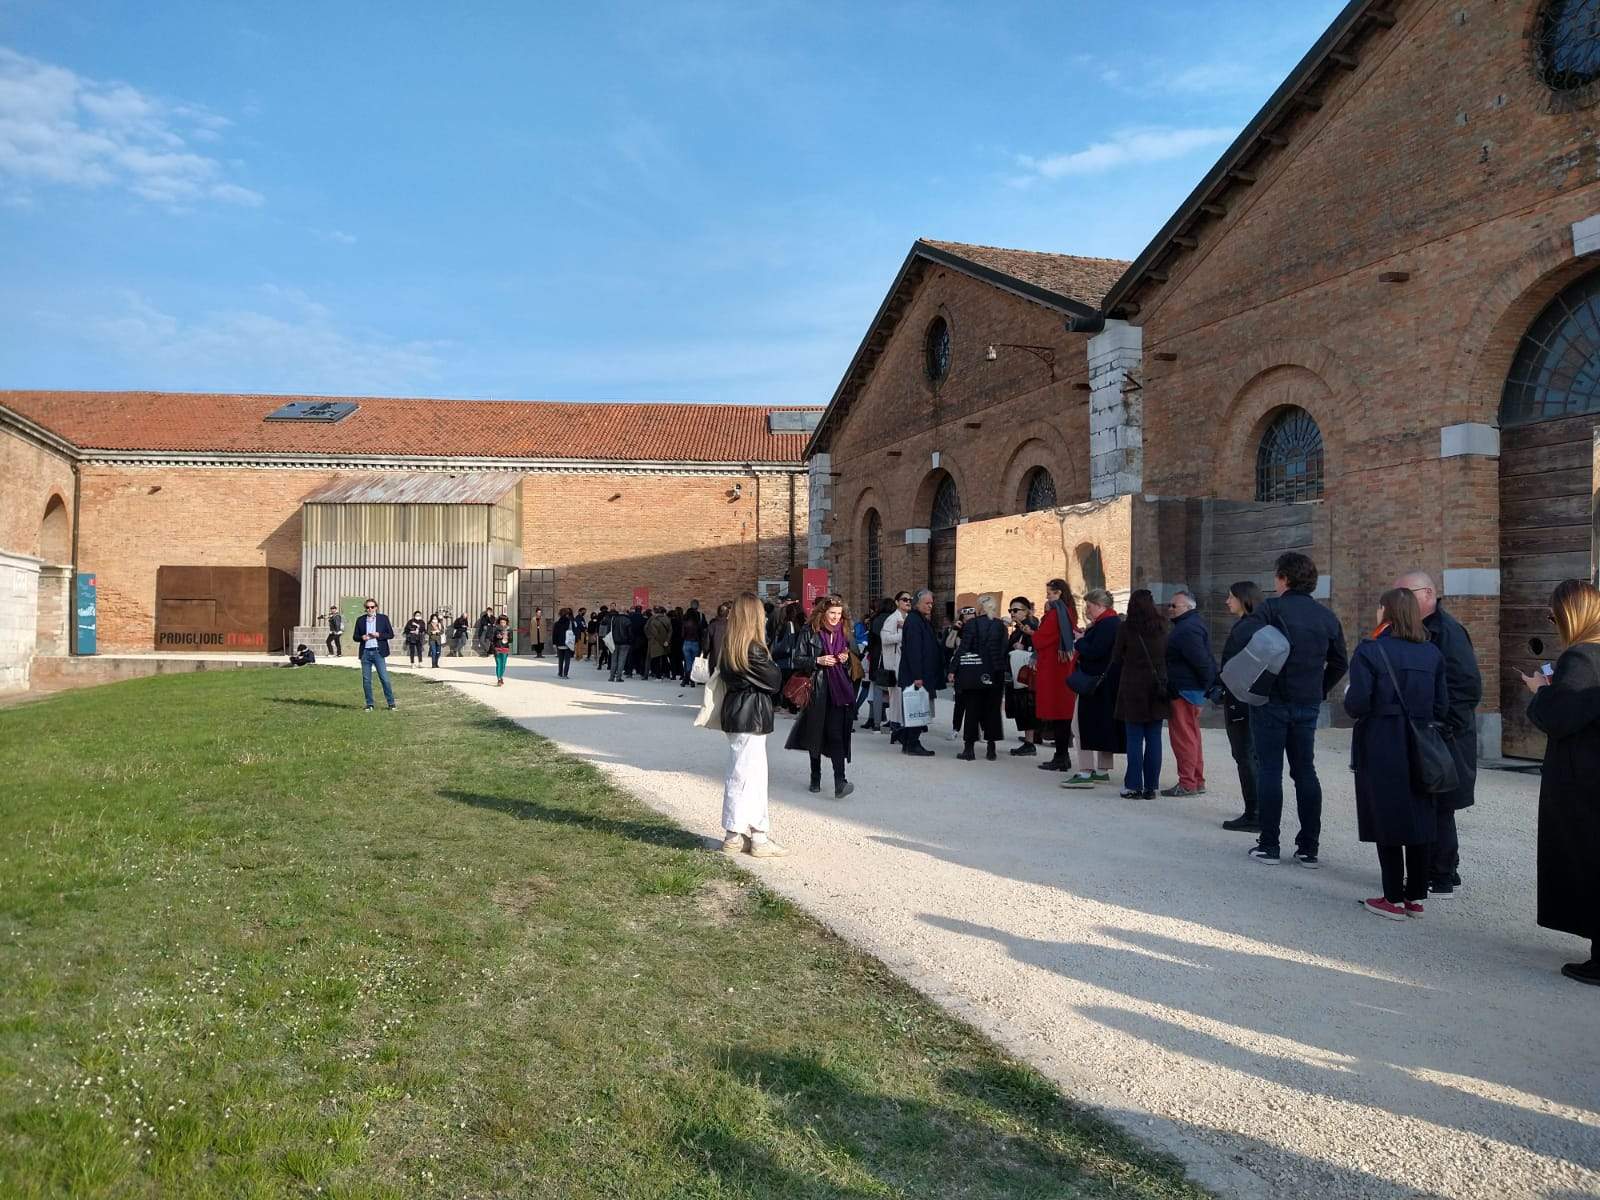 Venice Biennale, Italy Pavilion closed early today due to technical glitch